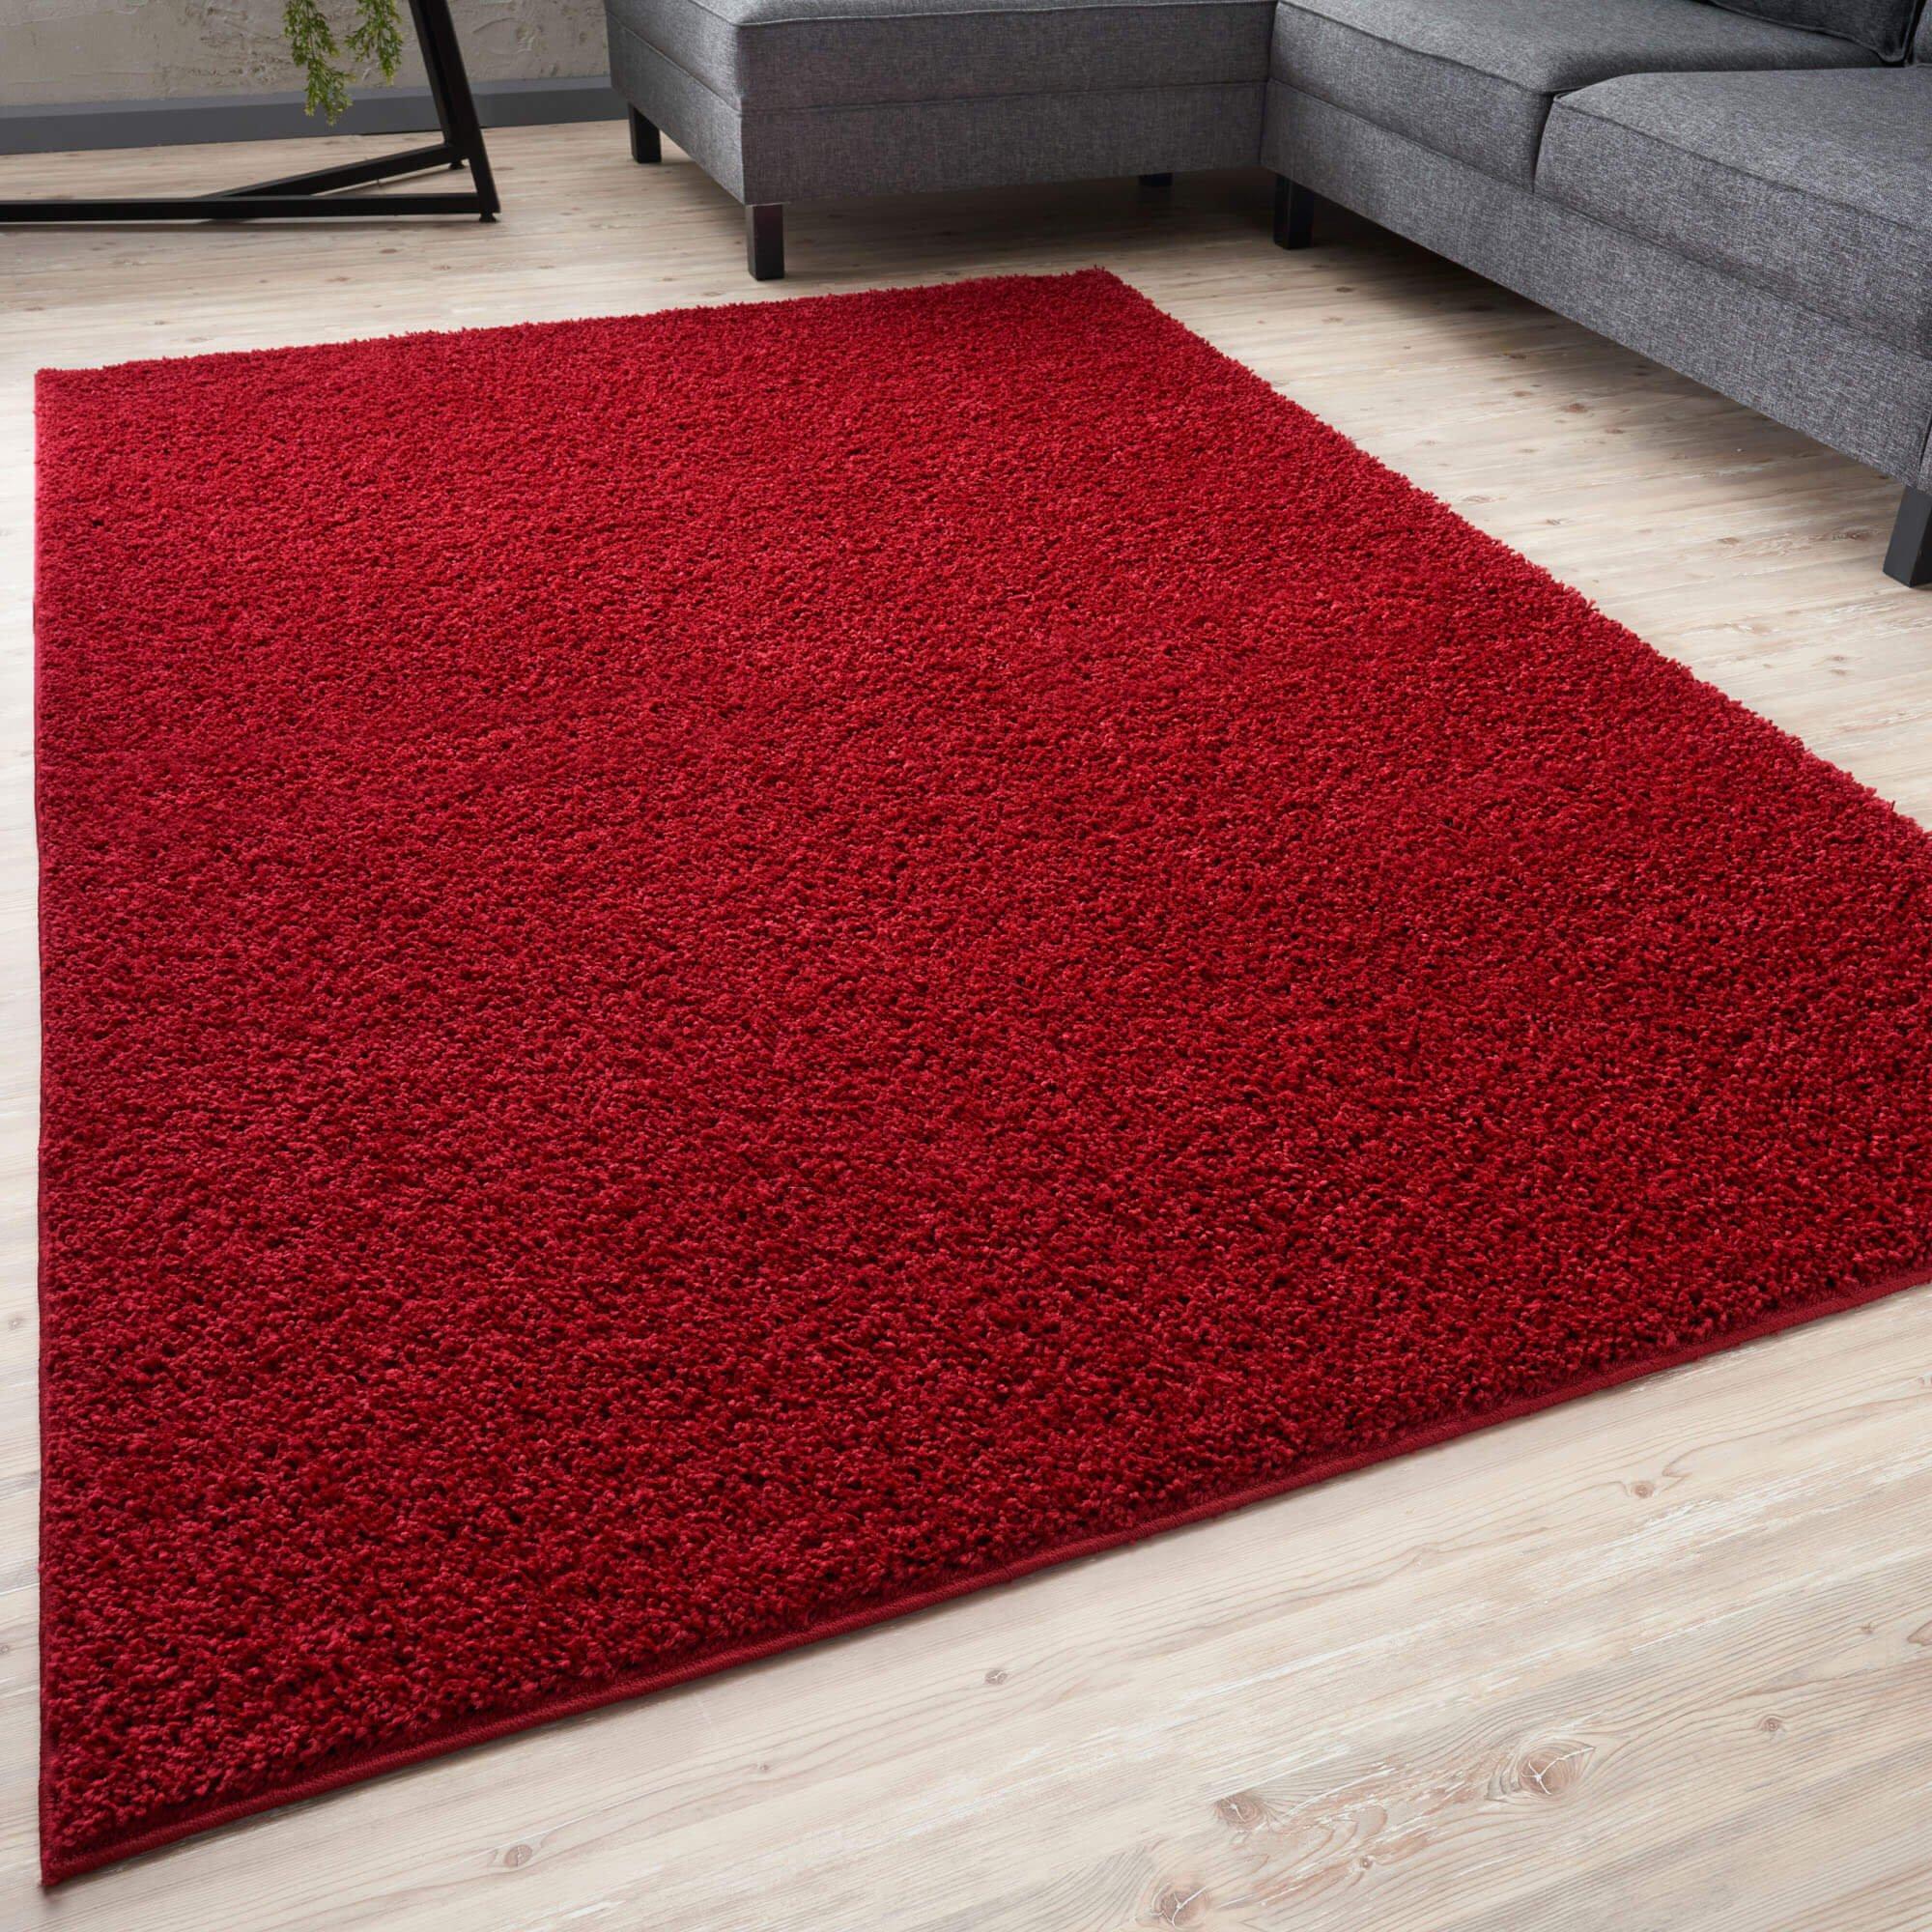 Myshaggy Collection Rugs Solid Design in Red